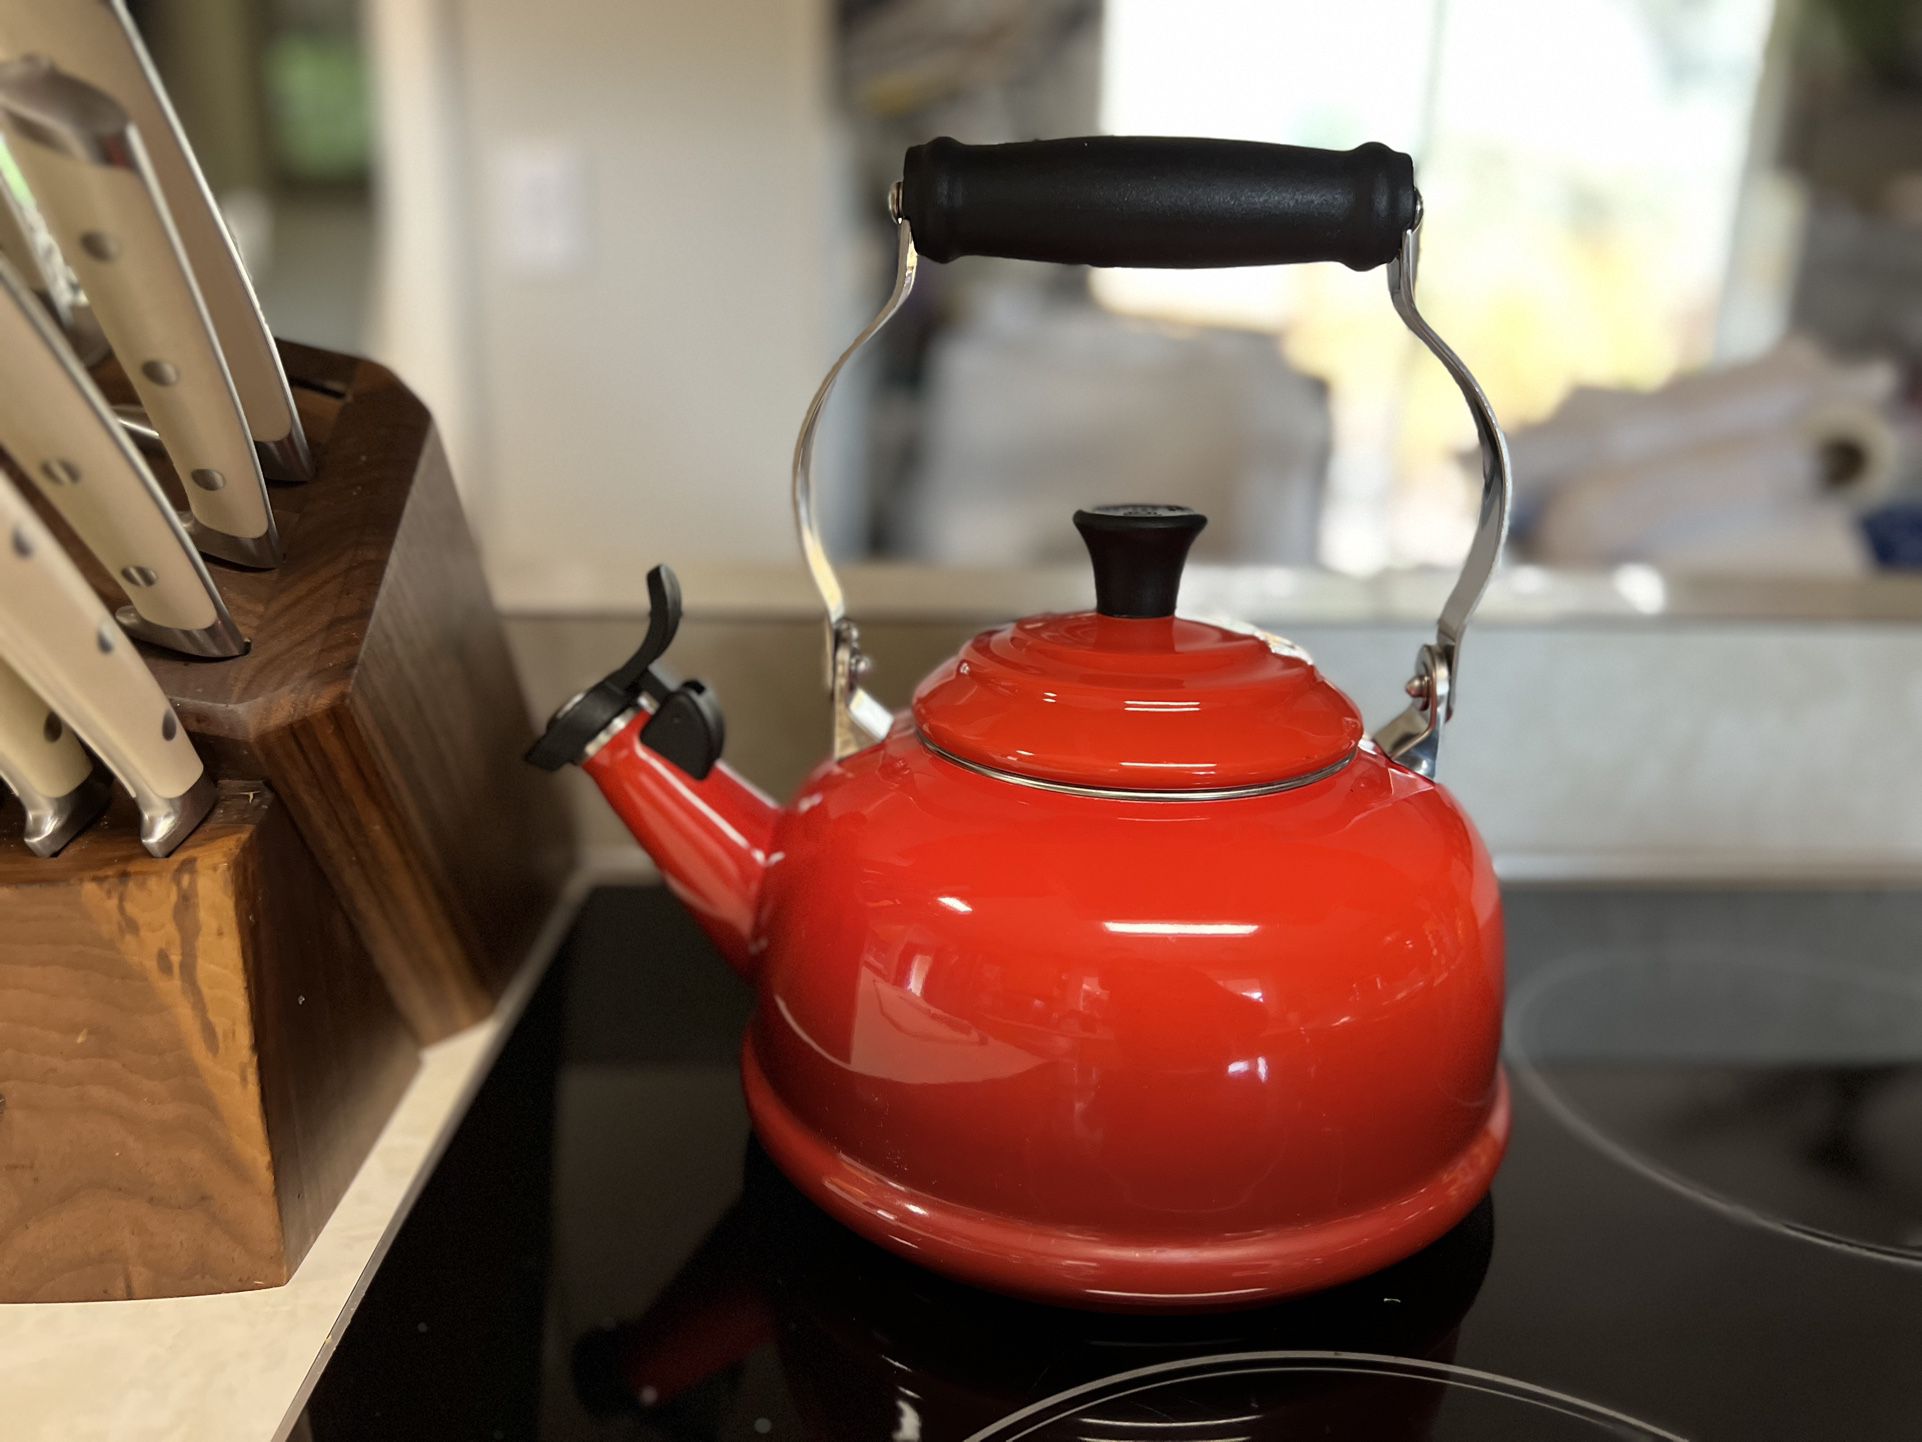 Le Creuset Classic Whistling Kettle, Cerise (Red) Sale in Everett, WA - OfferUp